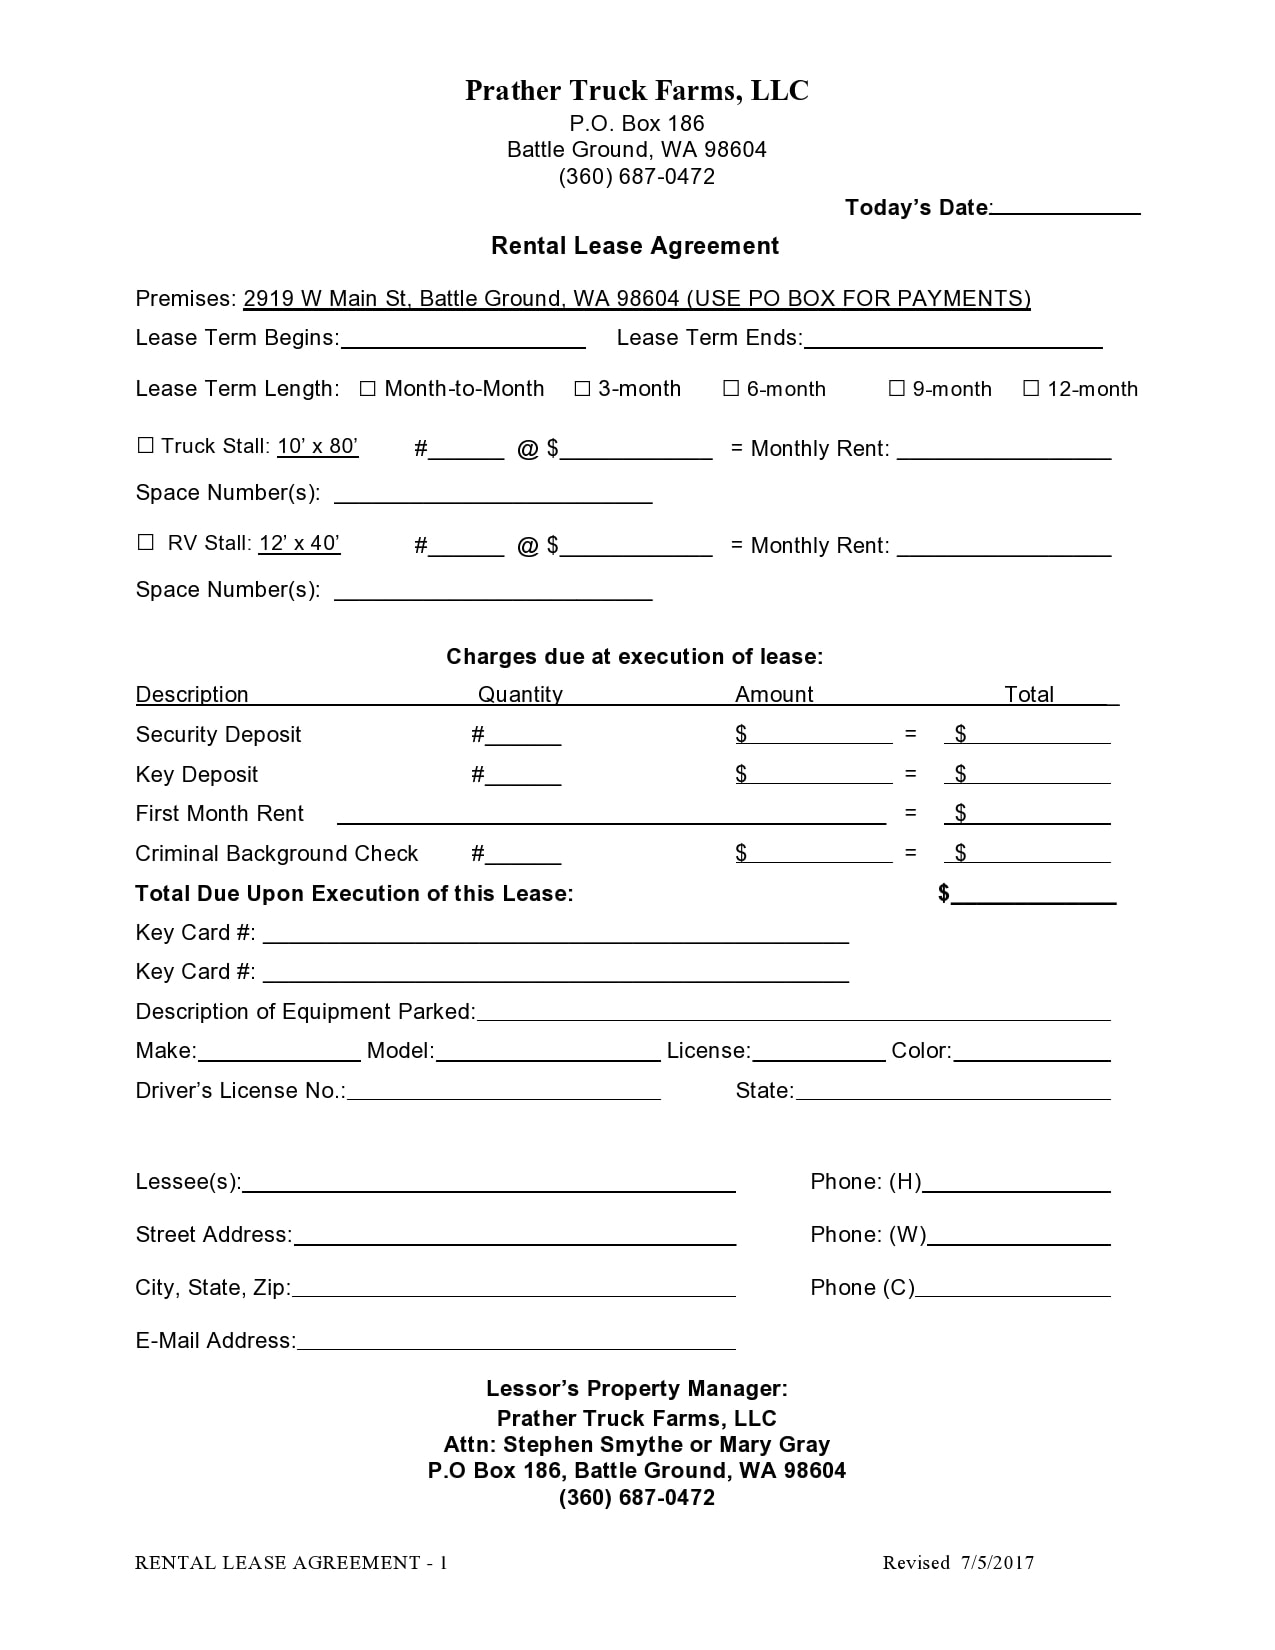 Lease Agreement Form For Trucking Companies Printable Form Templates